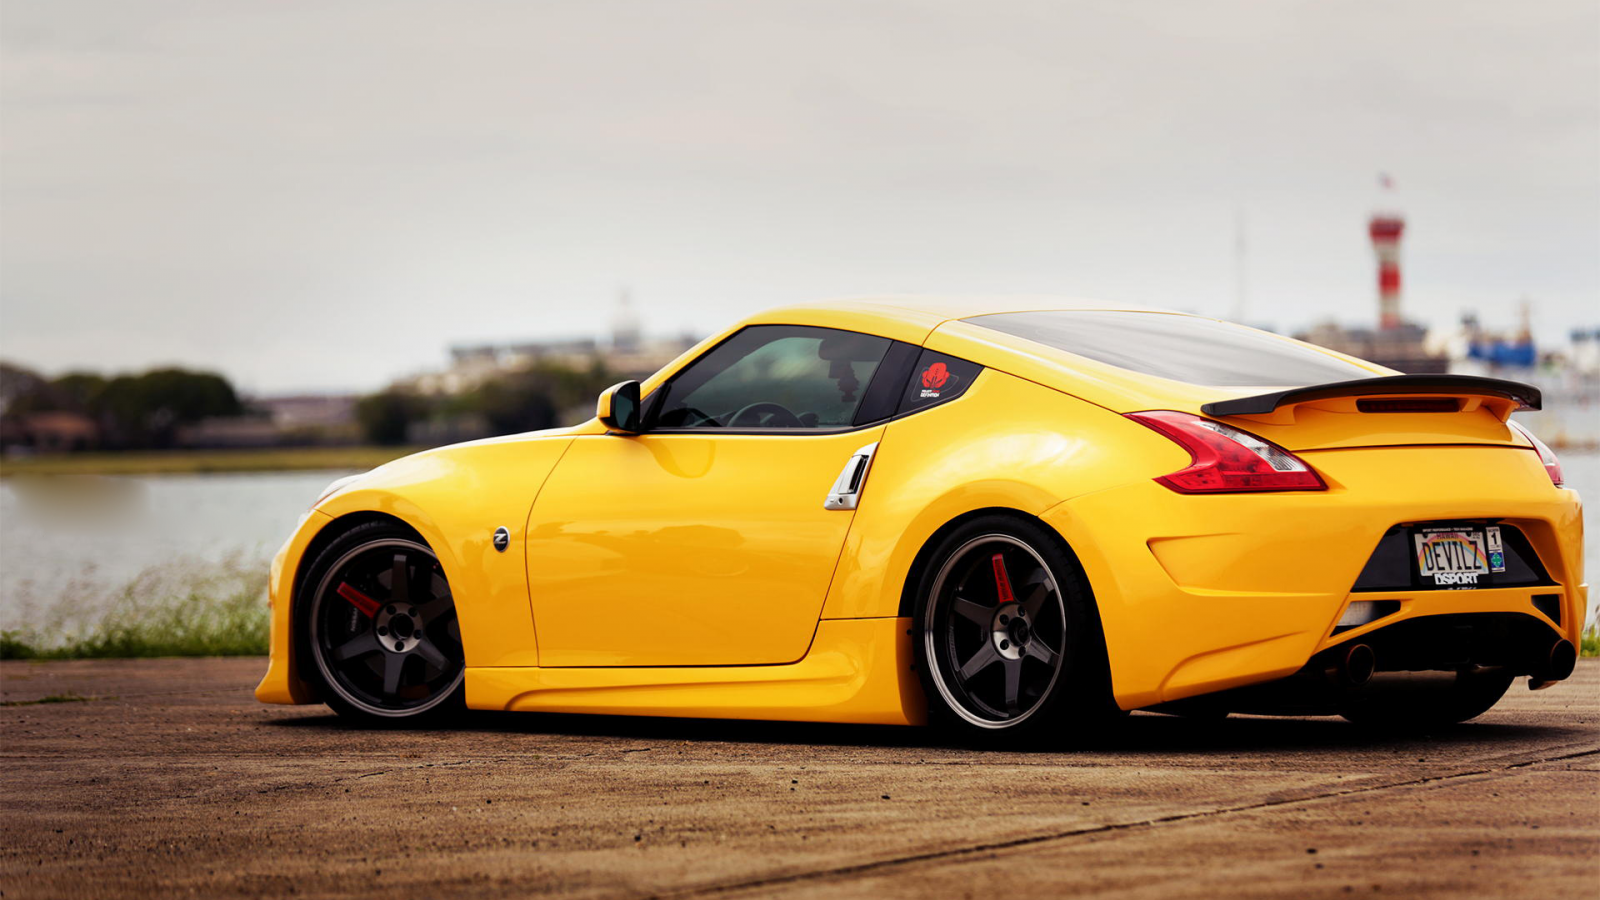 370z, tuning, stance, nissan